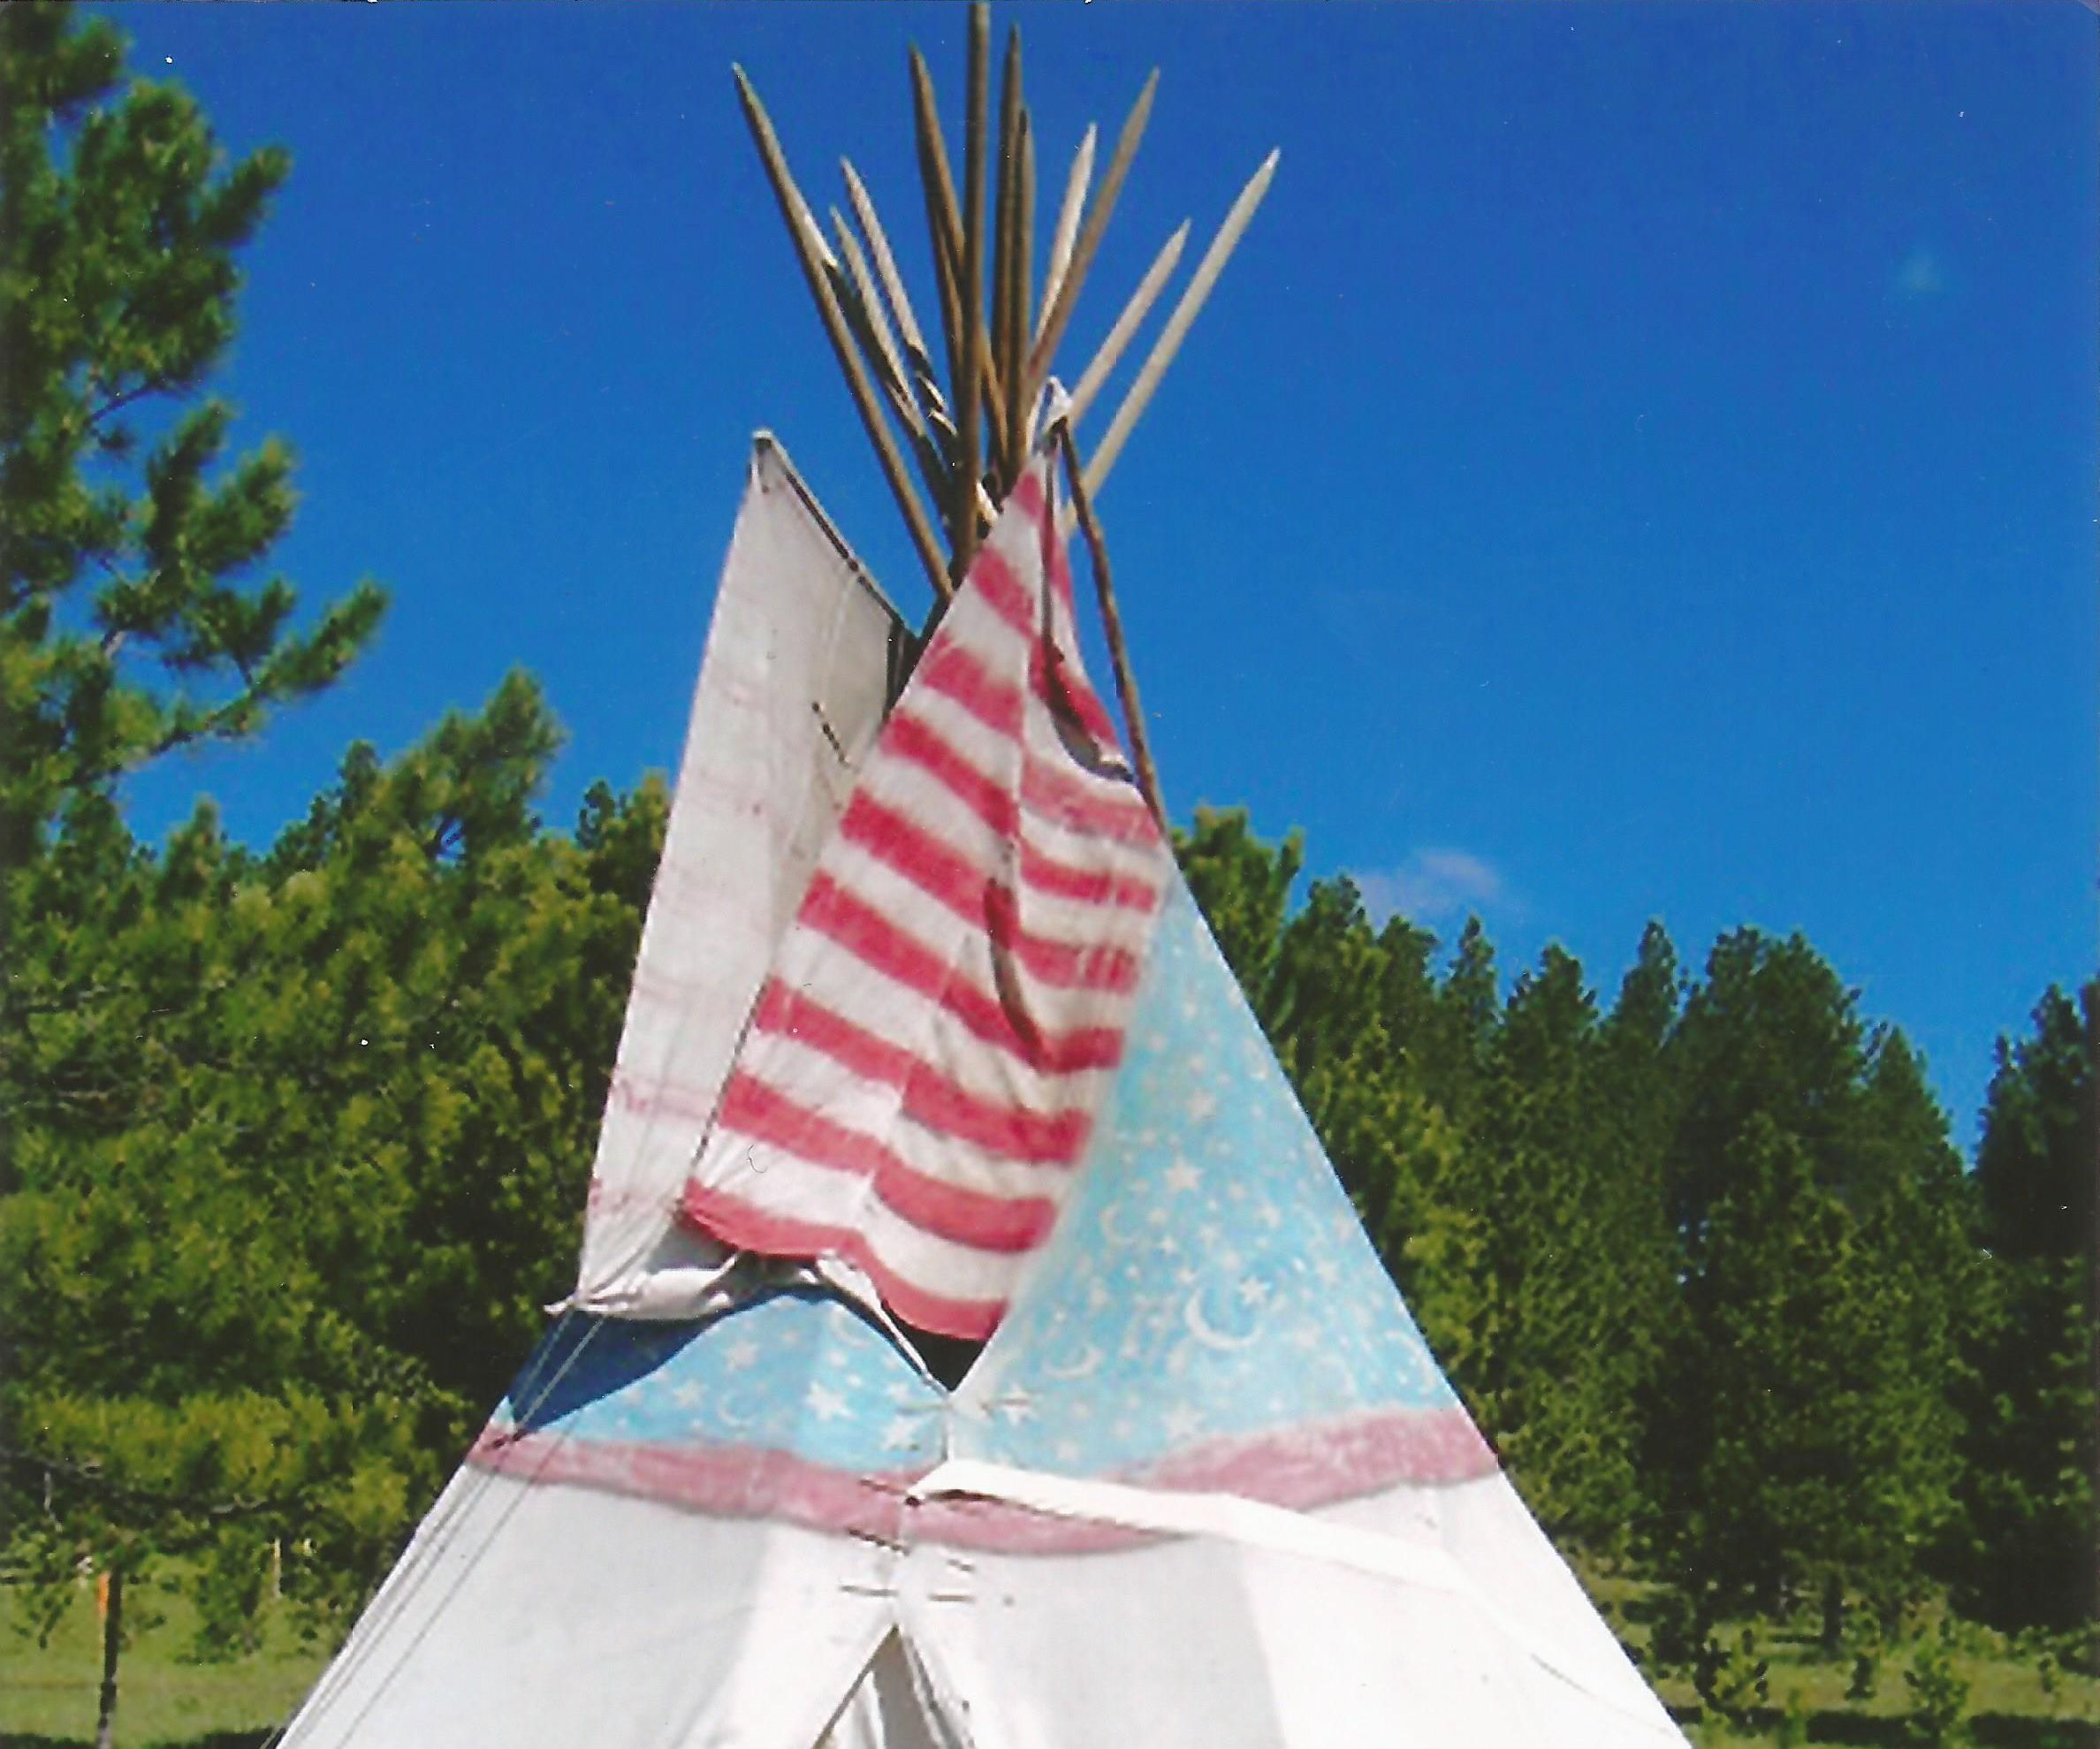 Make your own  Teepee